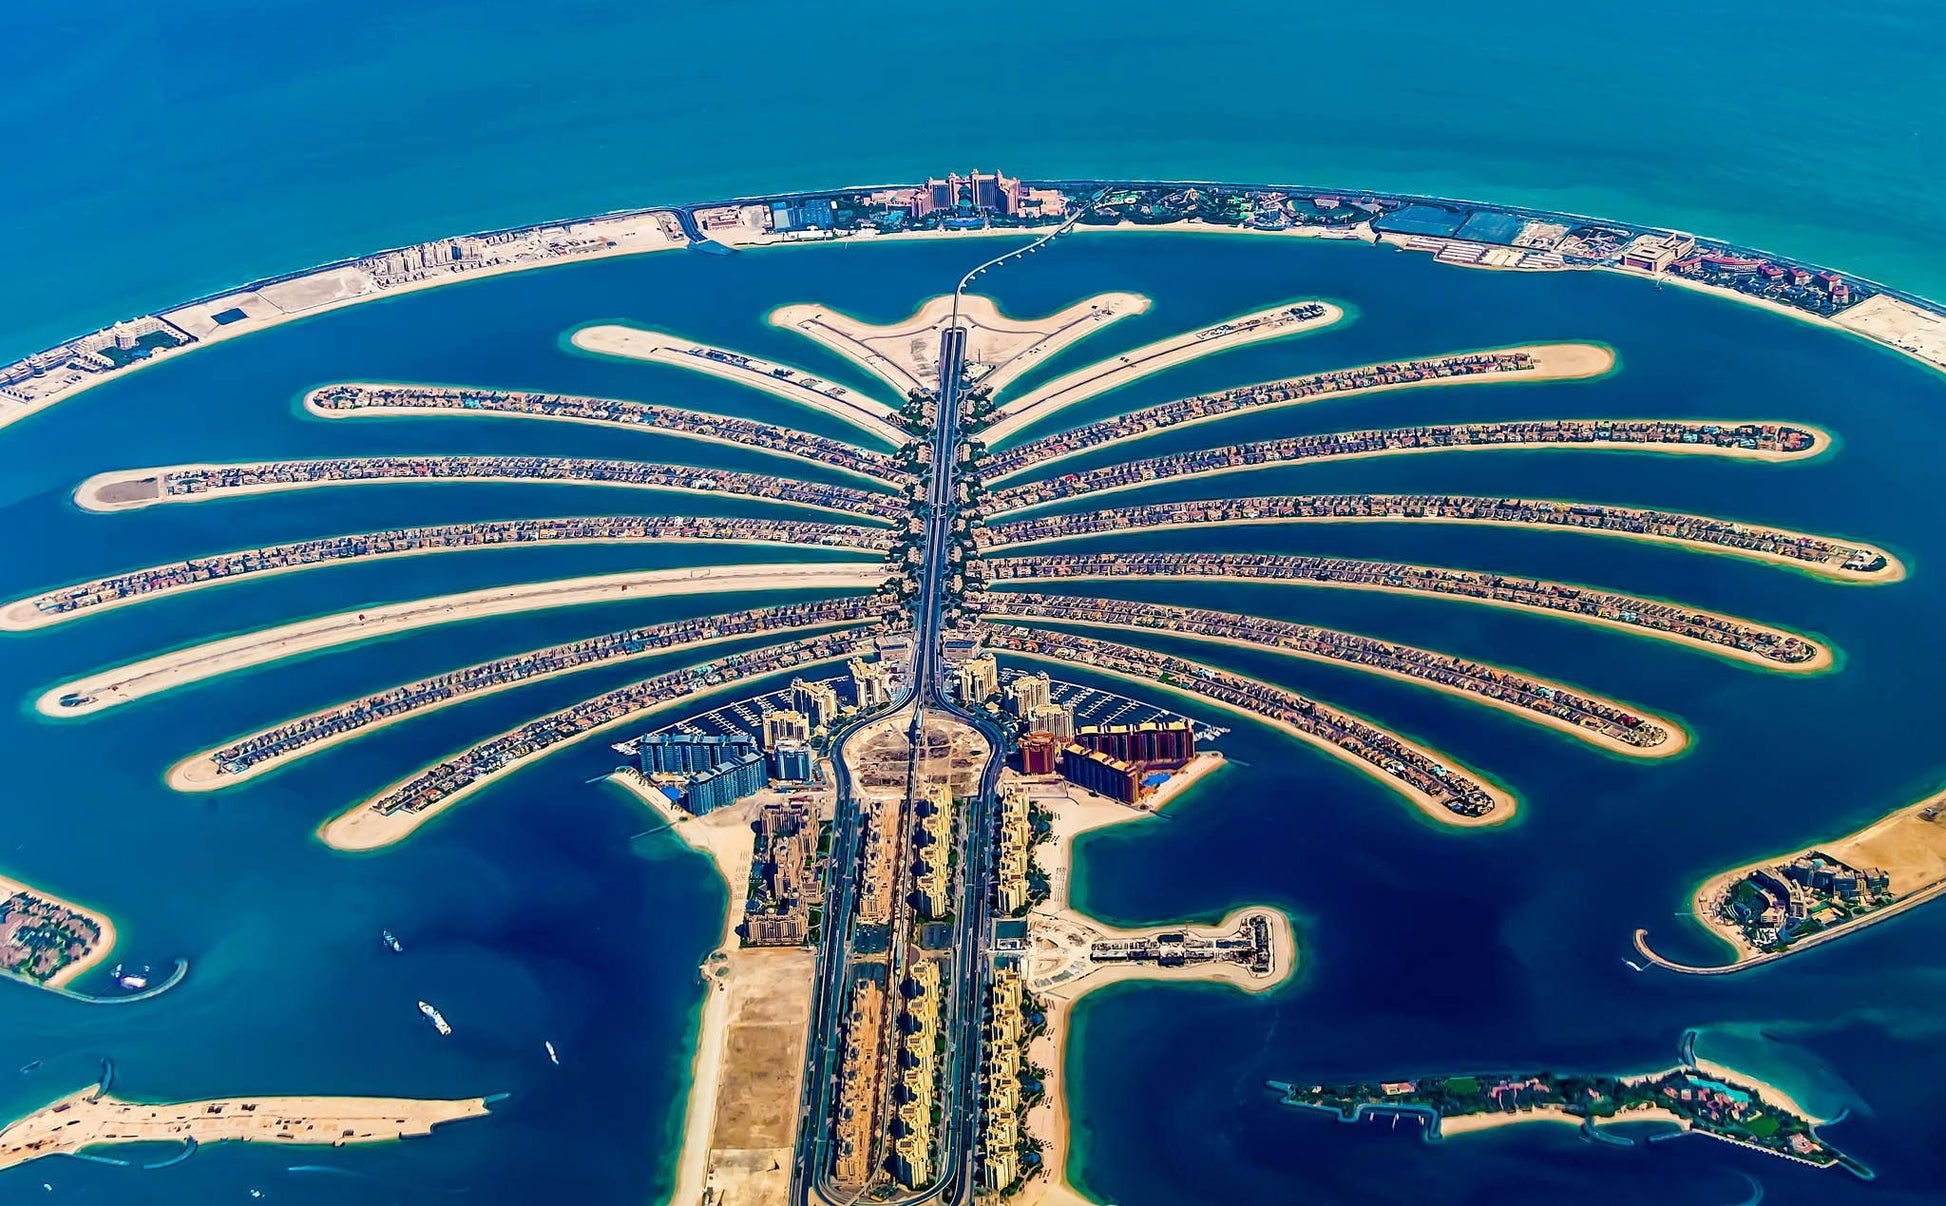 Dubai The View at the Palm Jumeirah Tickets, Grand 360 degree display of the iconic Palm Jumeirah, Arabian Gulf and beyond - Tripventura